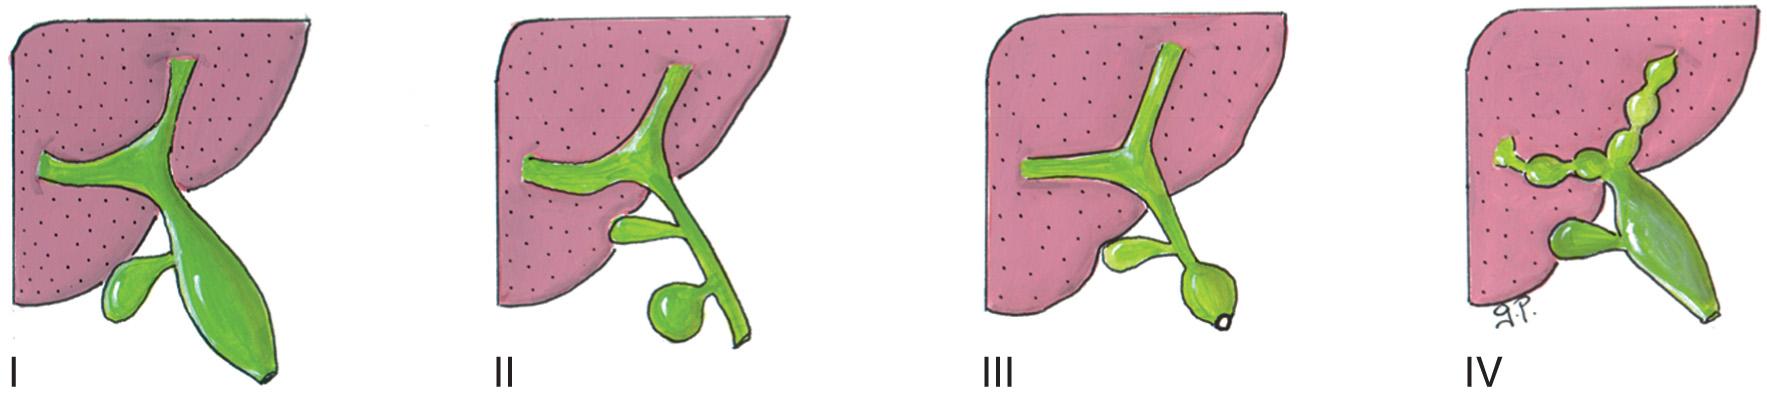 FIG. 6.6, Todani Classification System for Choledochal Cysts.